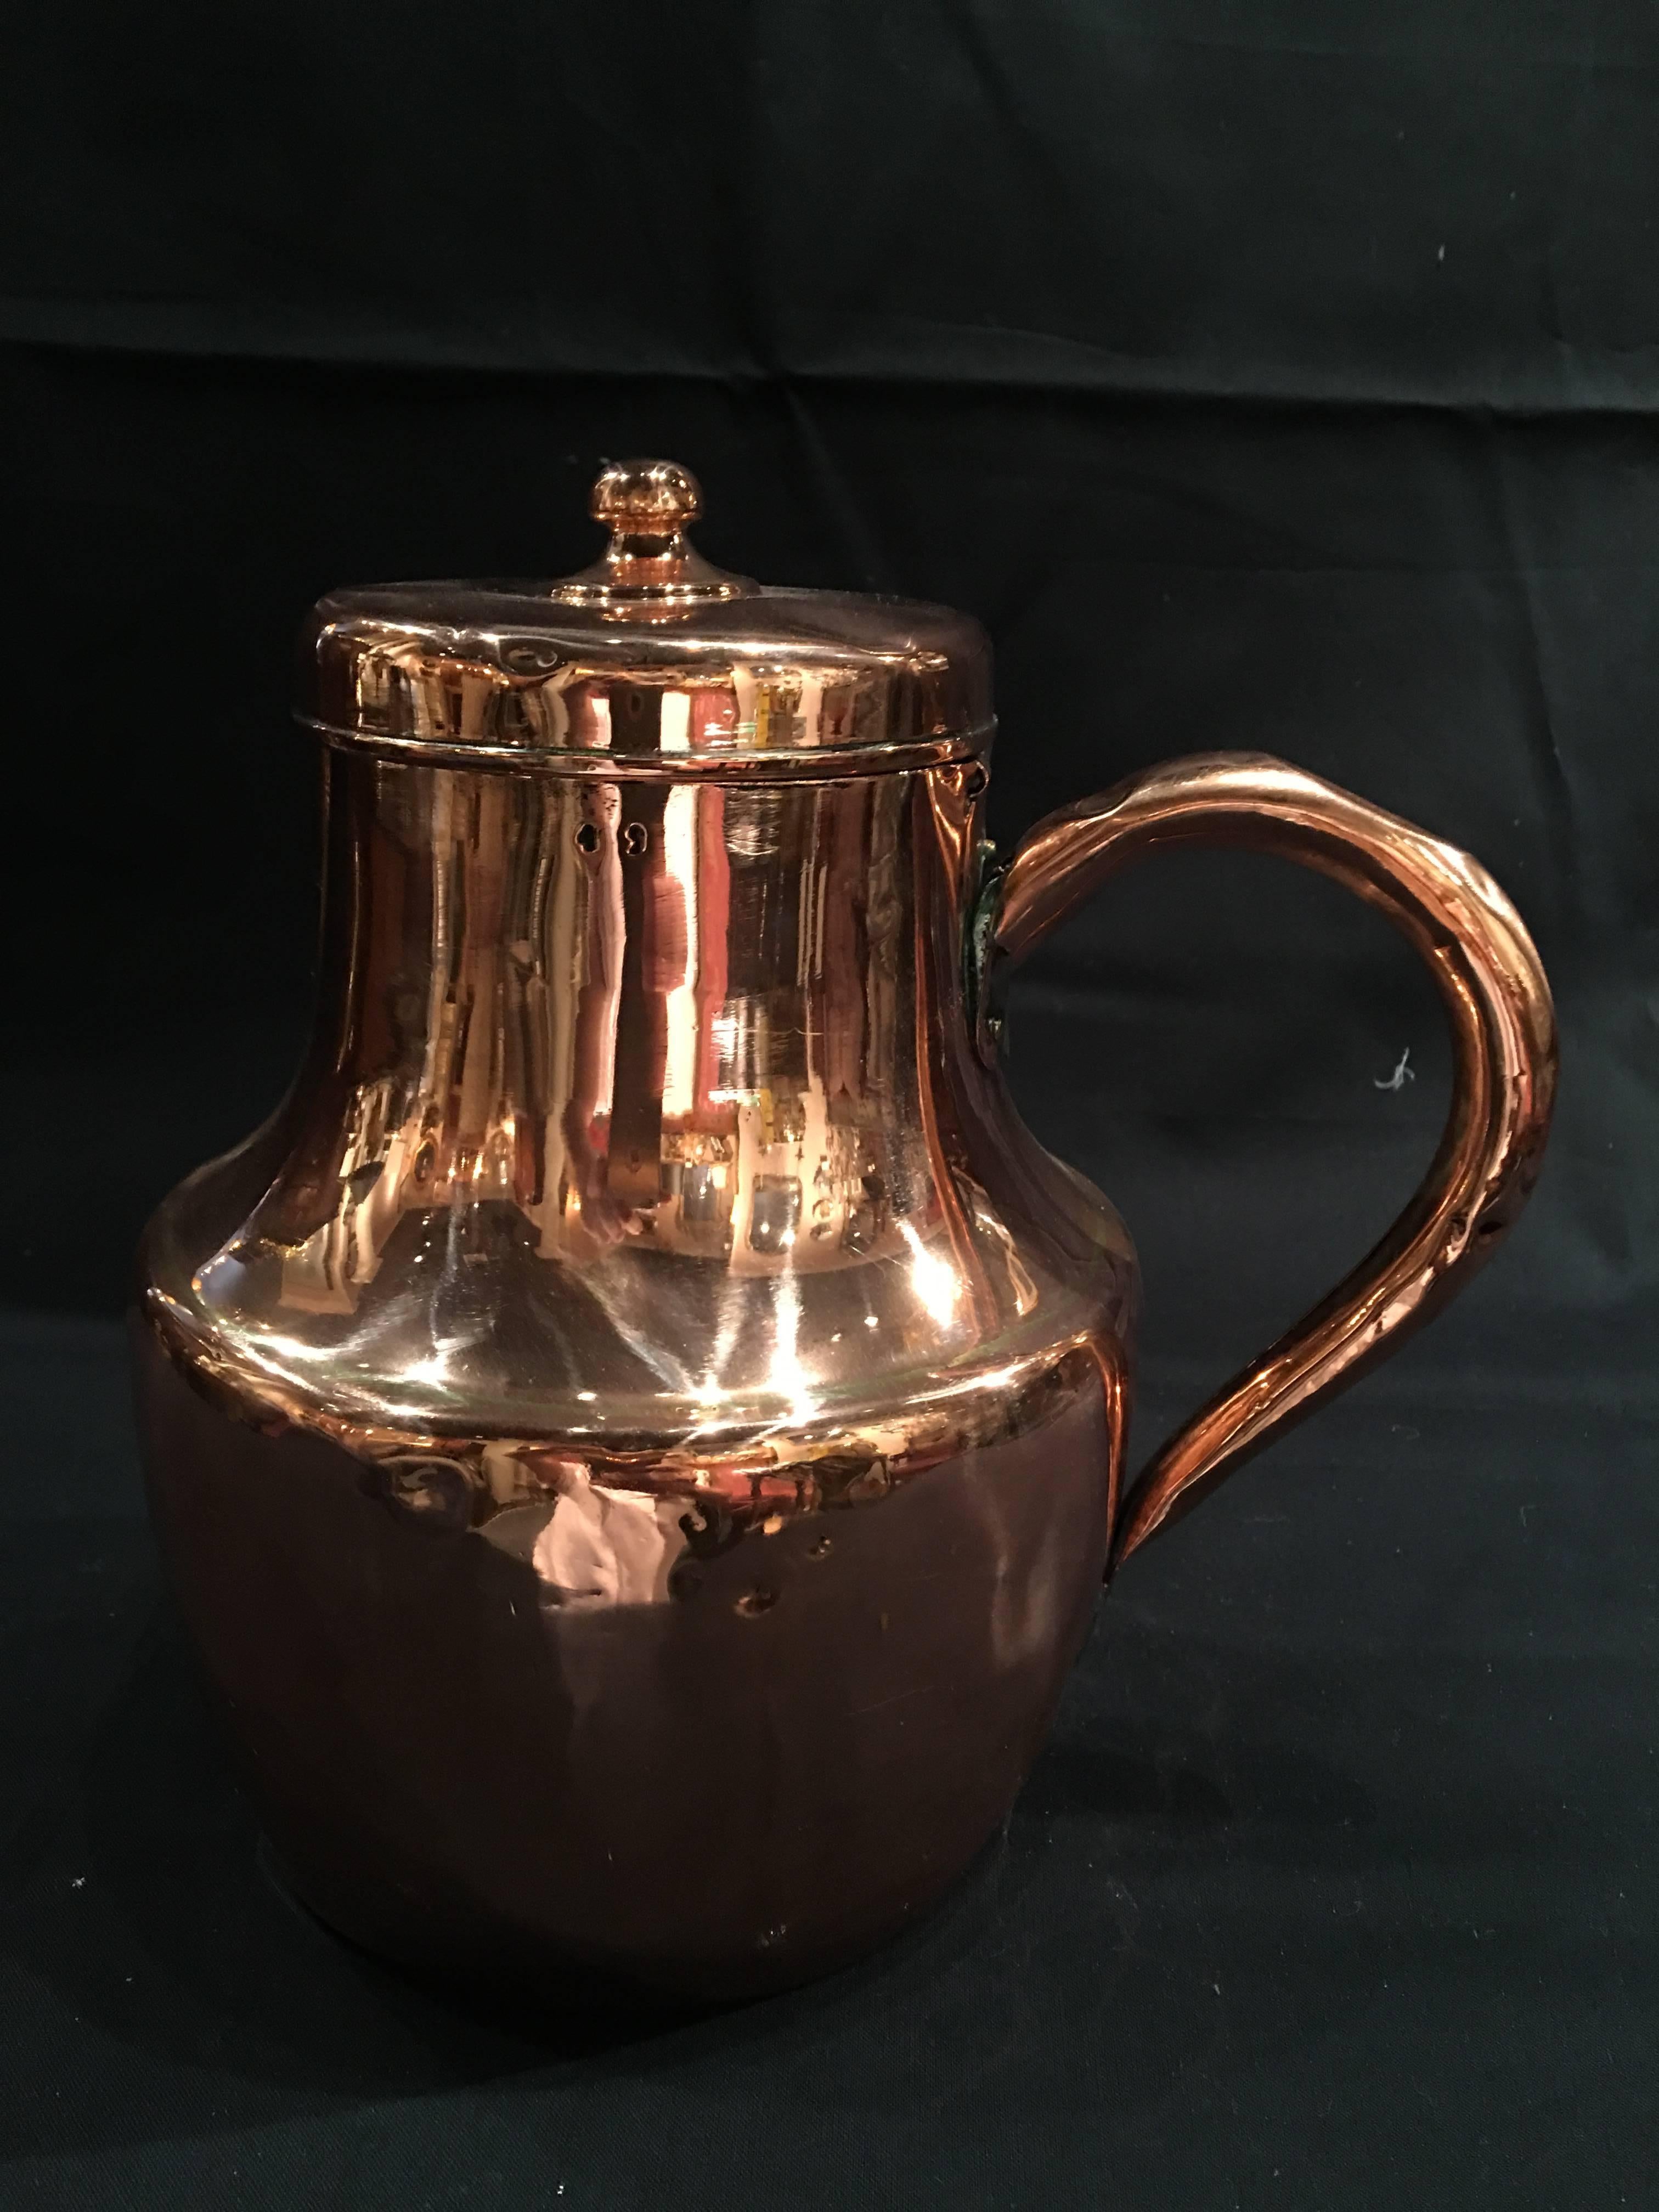 French polished copper pitcher or jug with handle, 19th century.